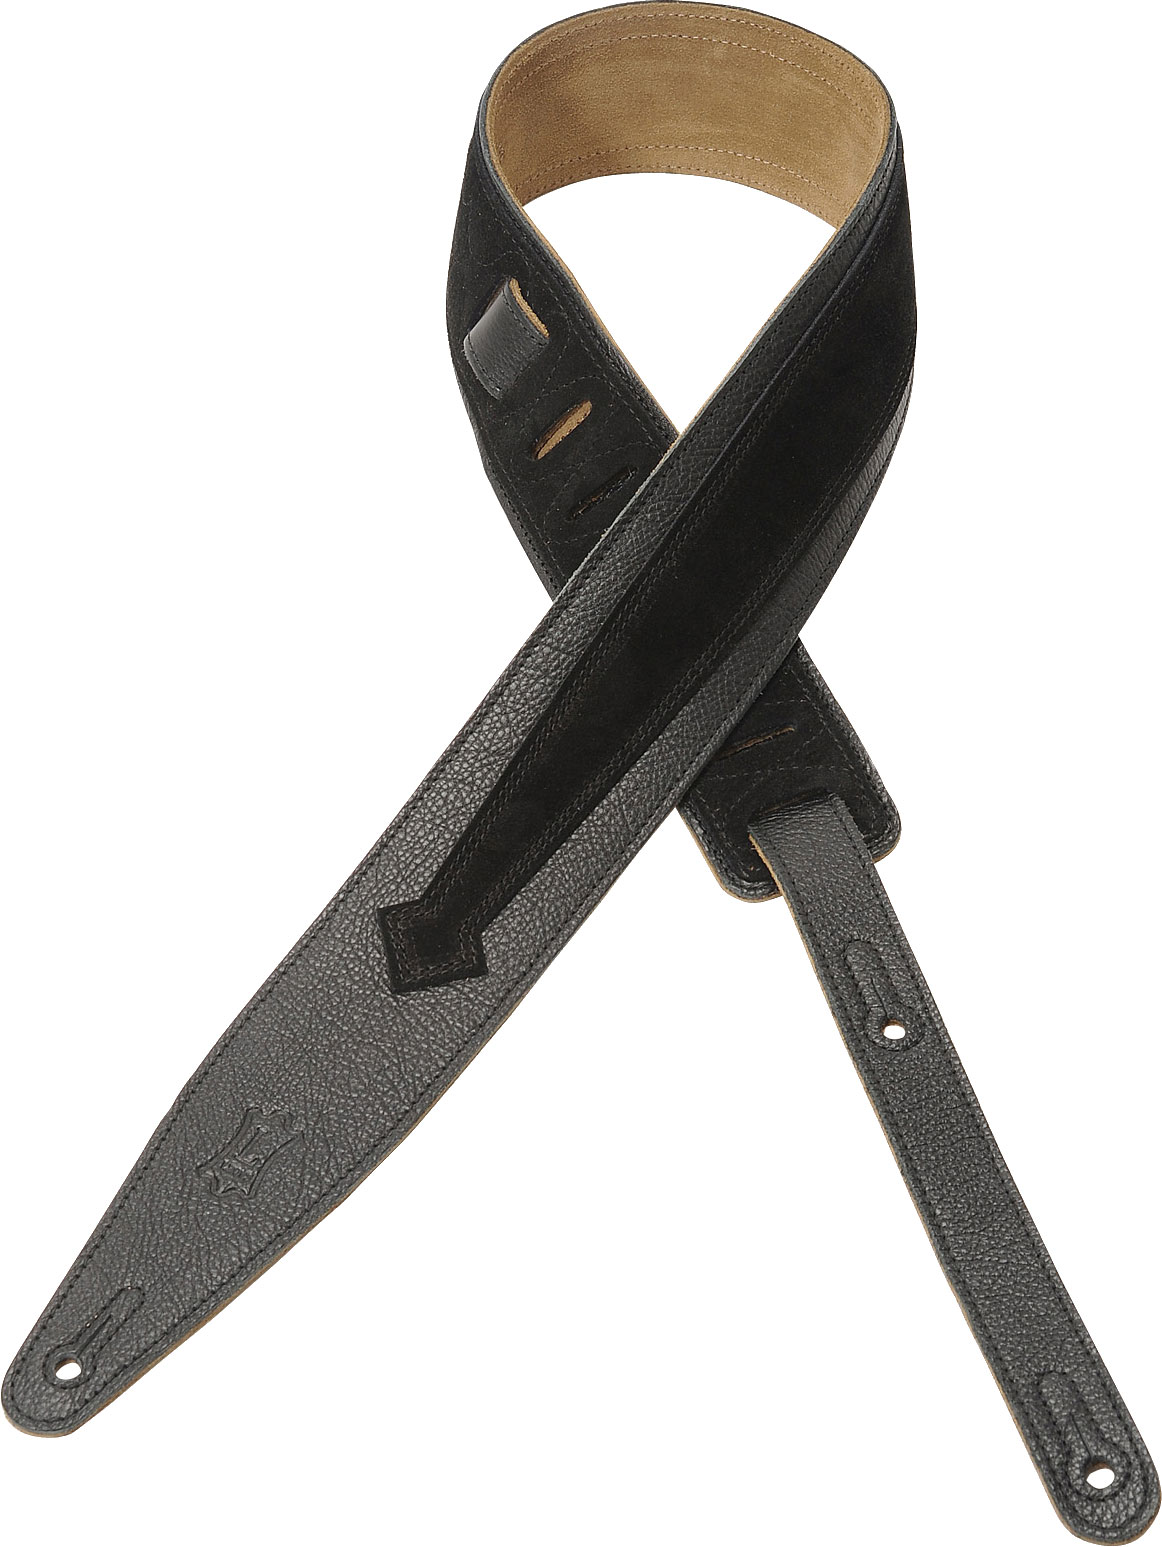 LEVY'S BLAKE - 6.4 CM, LEATHER WITH DOUBLE ARROW STITCHING IN SUEDE - BLACK